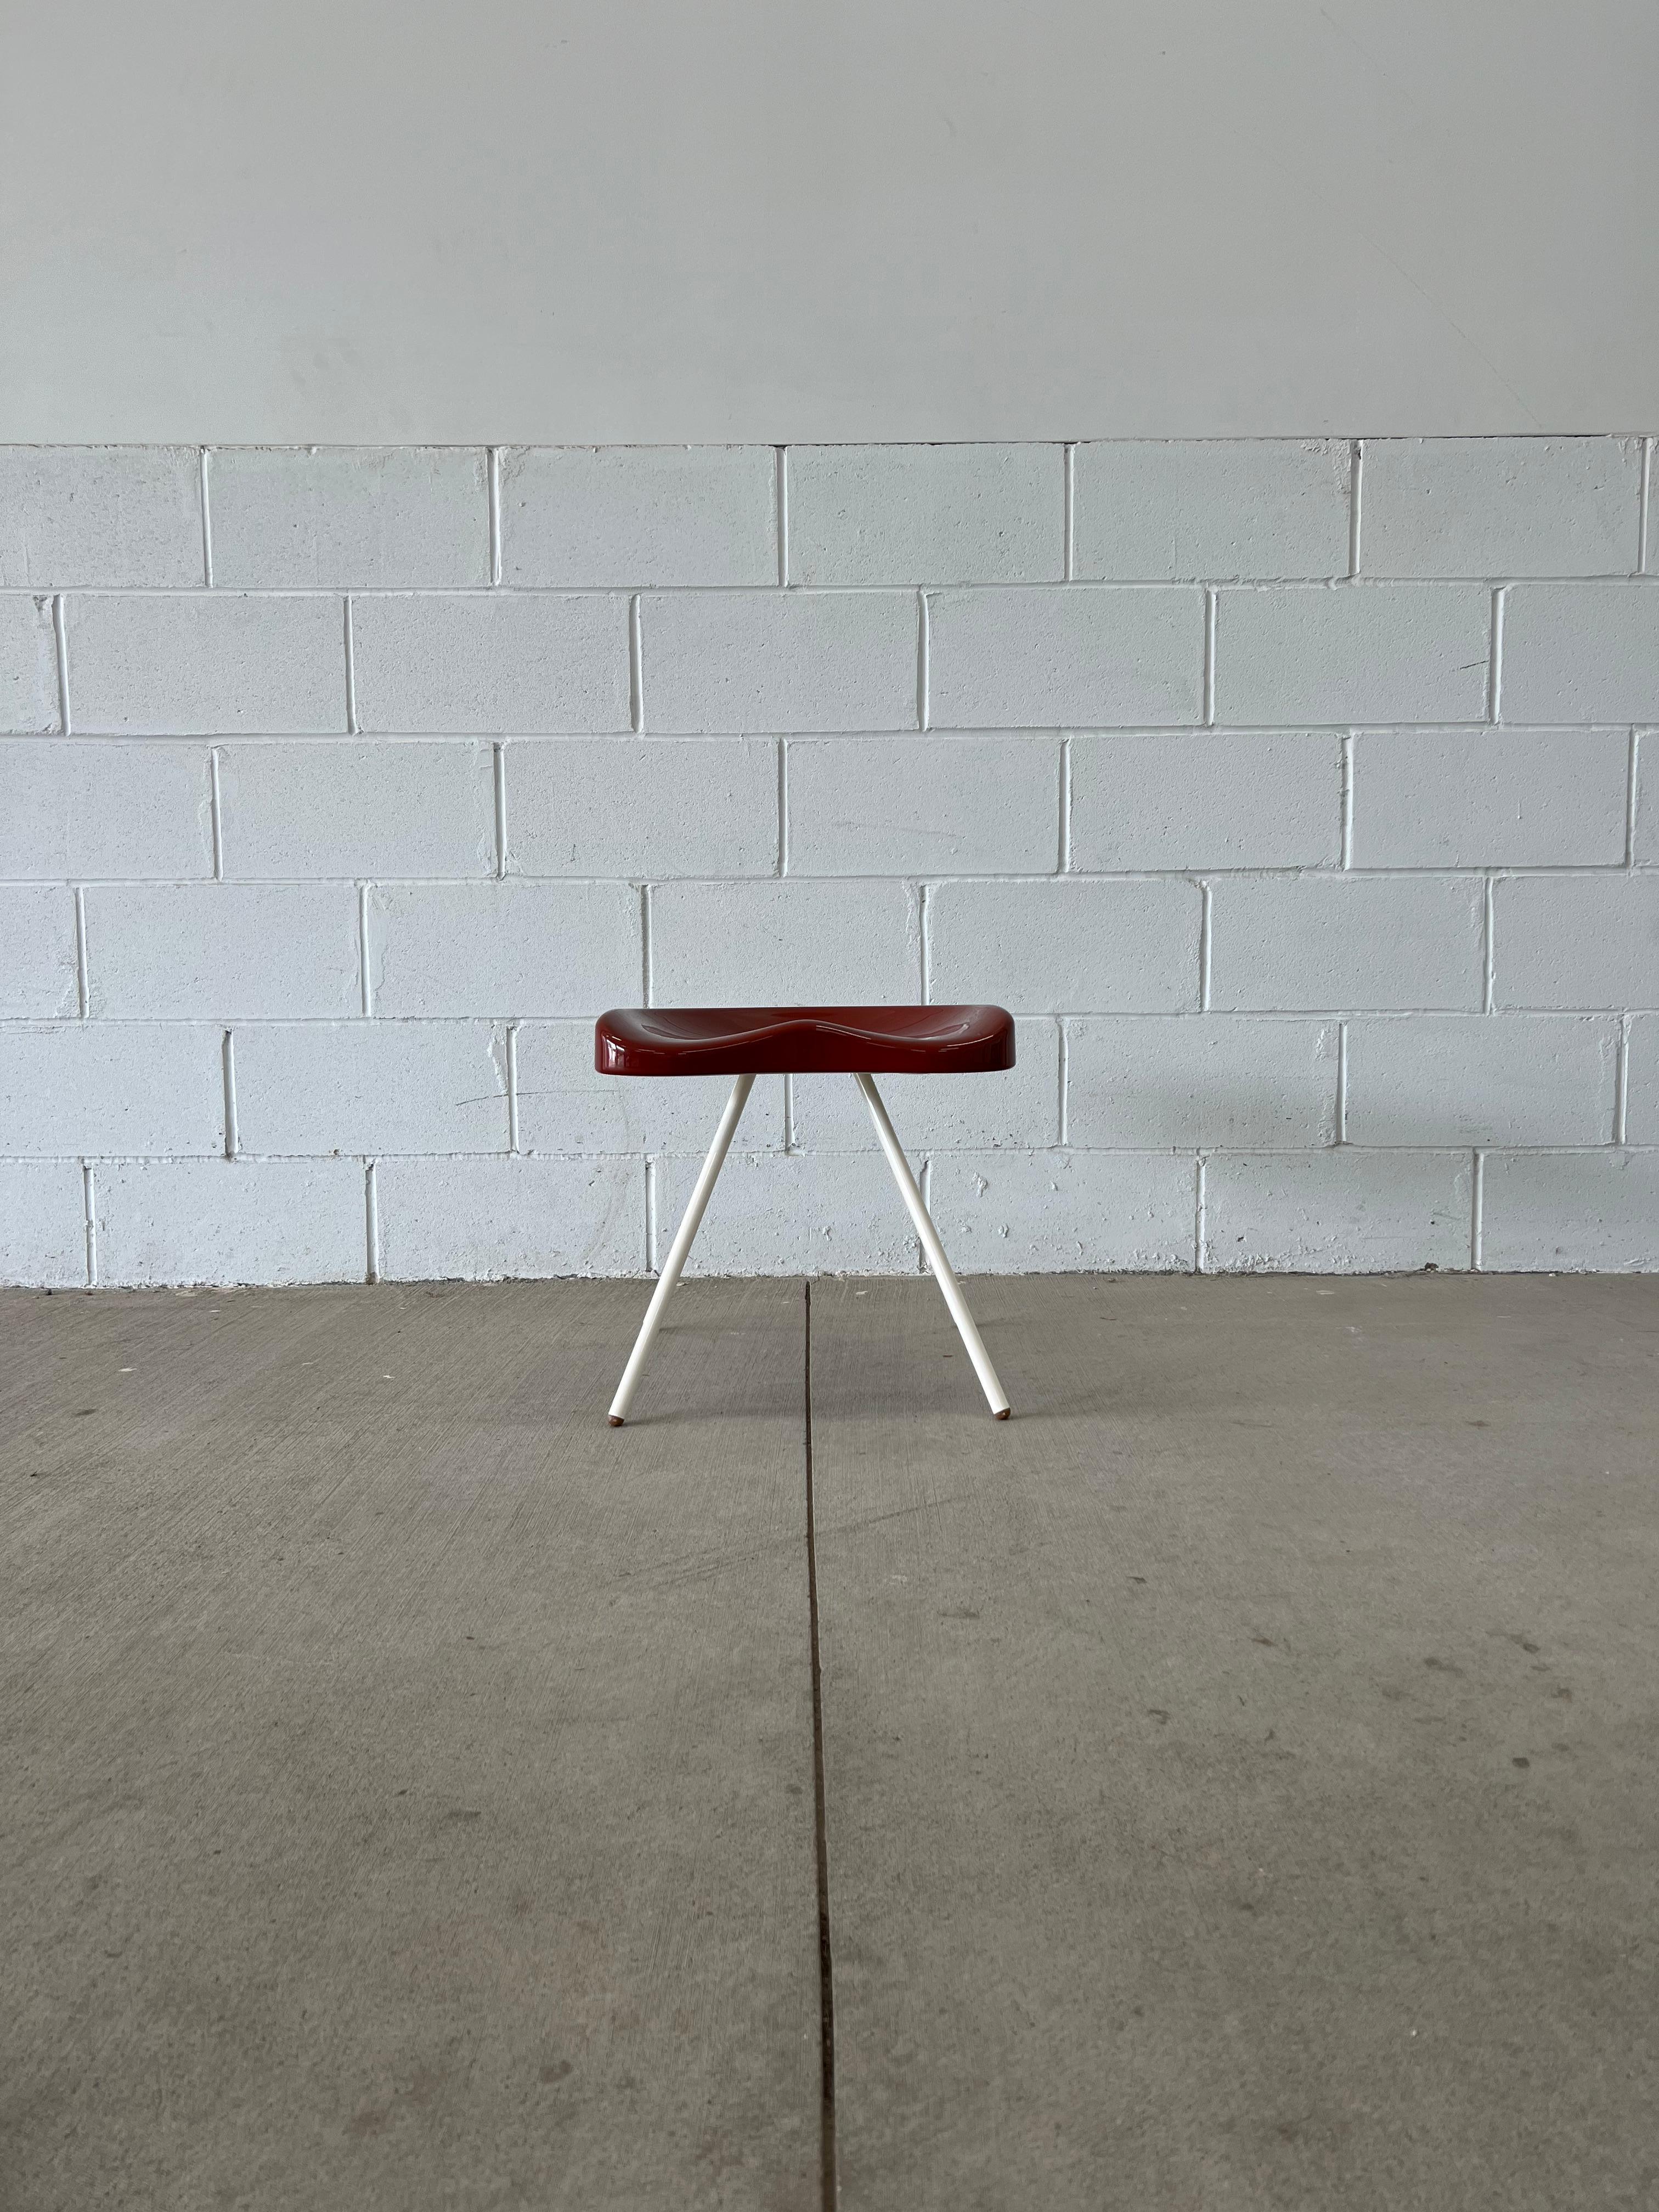 Limited edition Tabouret 307, designed by Jean Prouvé in 1951. Reissued for the Vitra x G Star Raw collaboration in 2011. Limited edition of 200 - 100 in white and basalt, 100 in white and red. This is number 106.